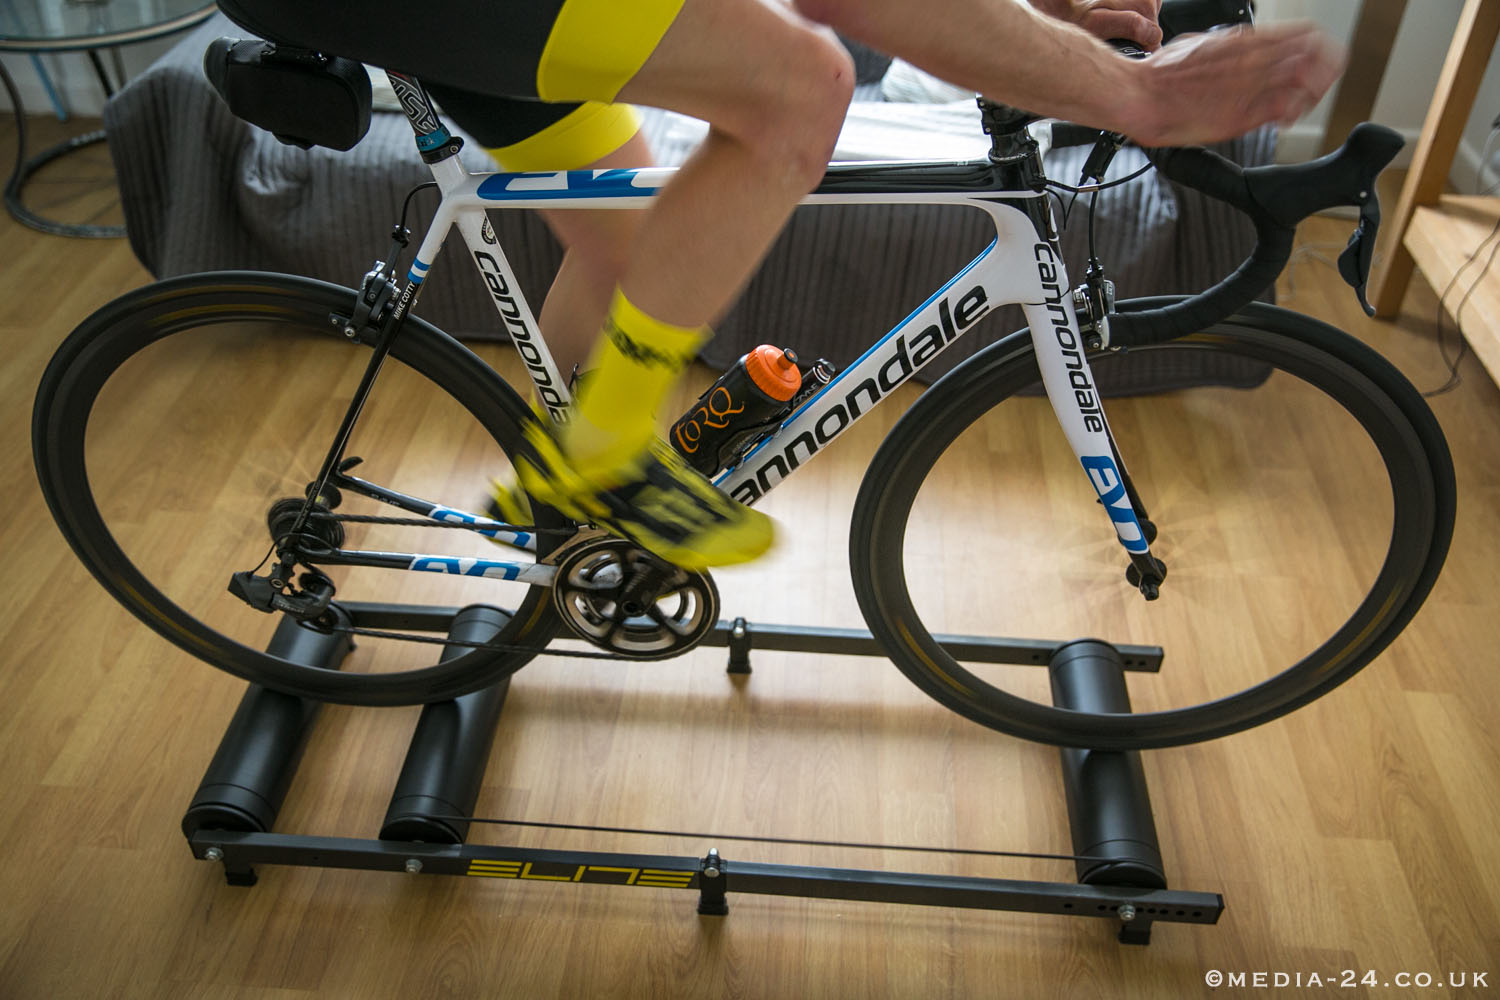 The Definitive Guide To Off Season Bike Training Tailwind Coaching within cycling rollers training plan pertaining to Inviting